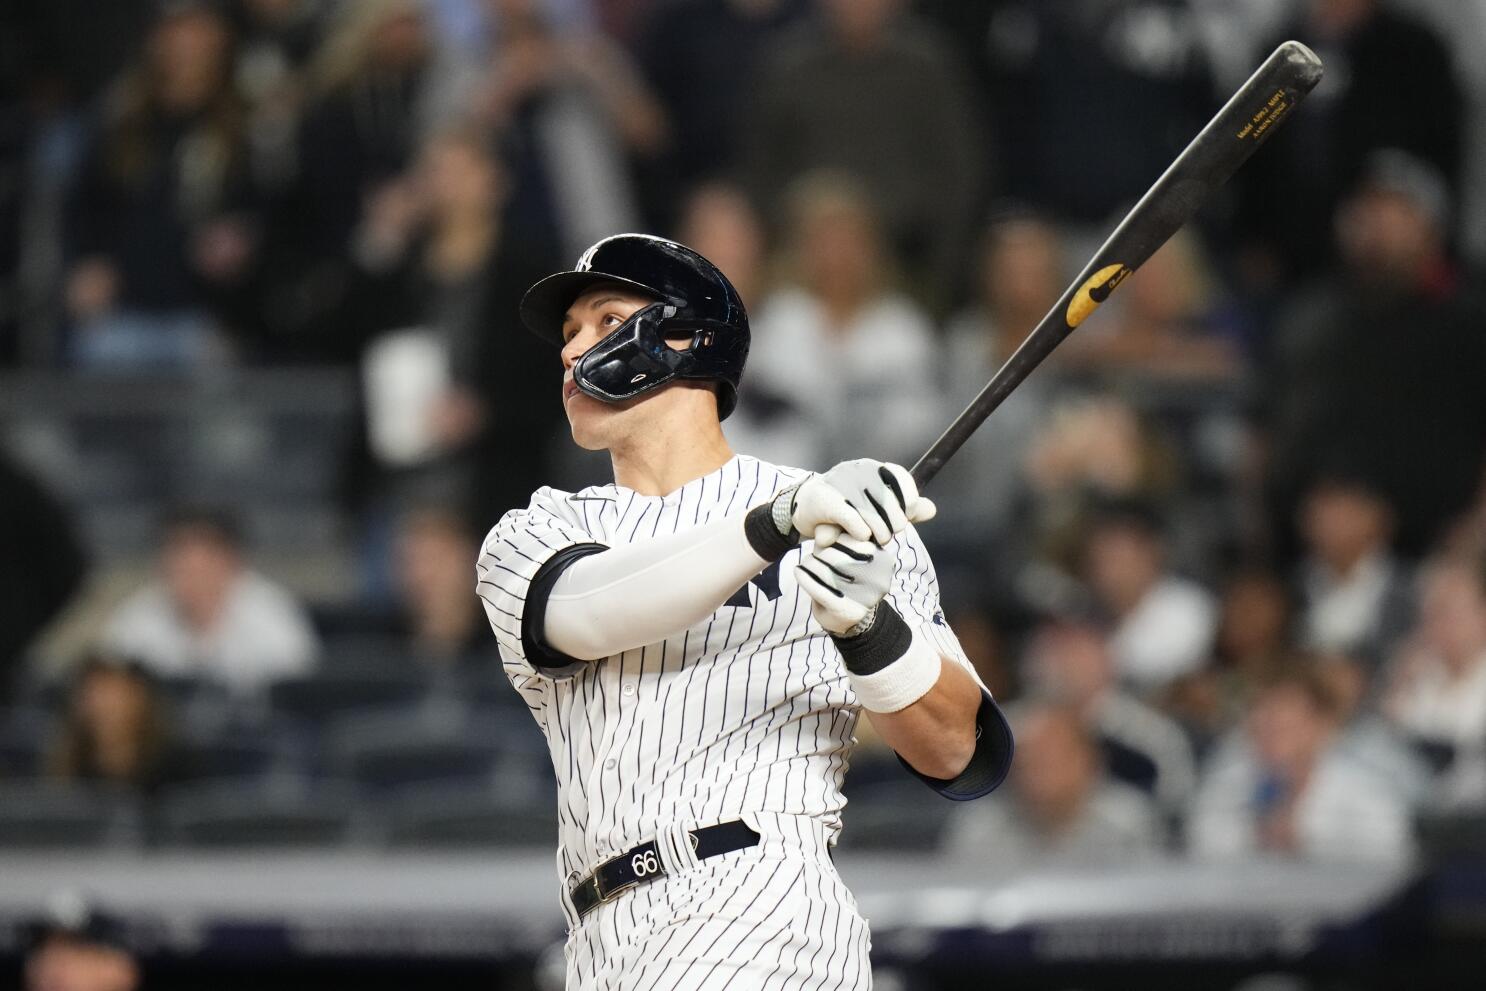 Judge hits tying HR in 9th, Volpe wins it in 10th as Yankees rally